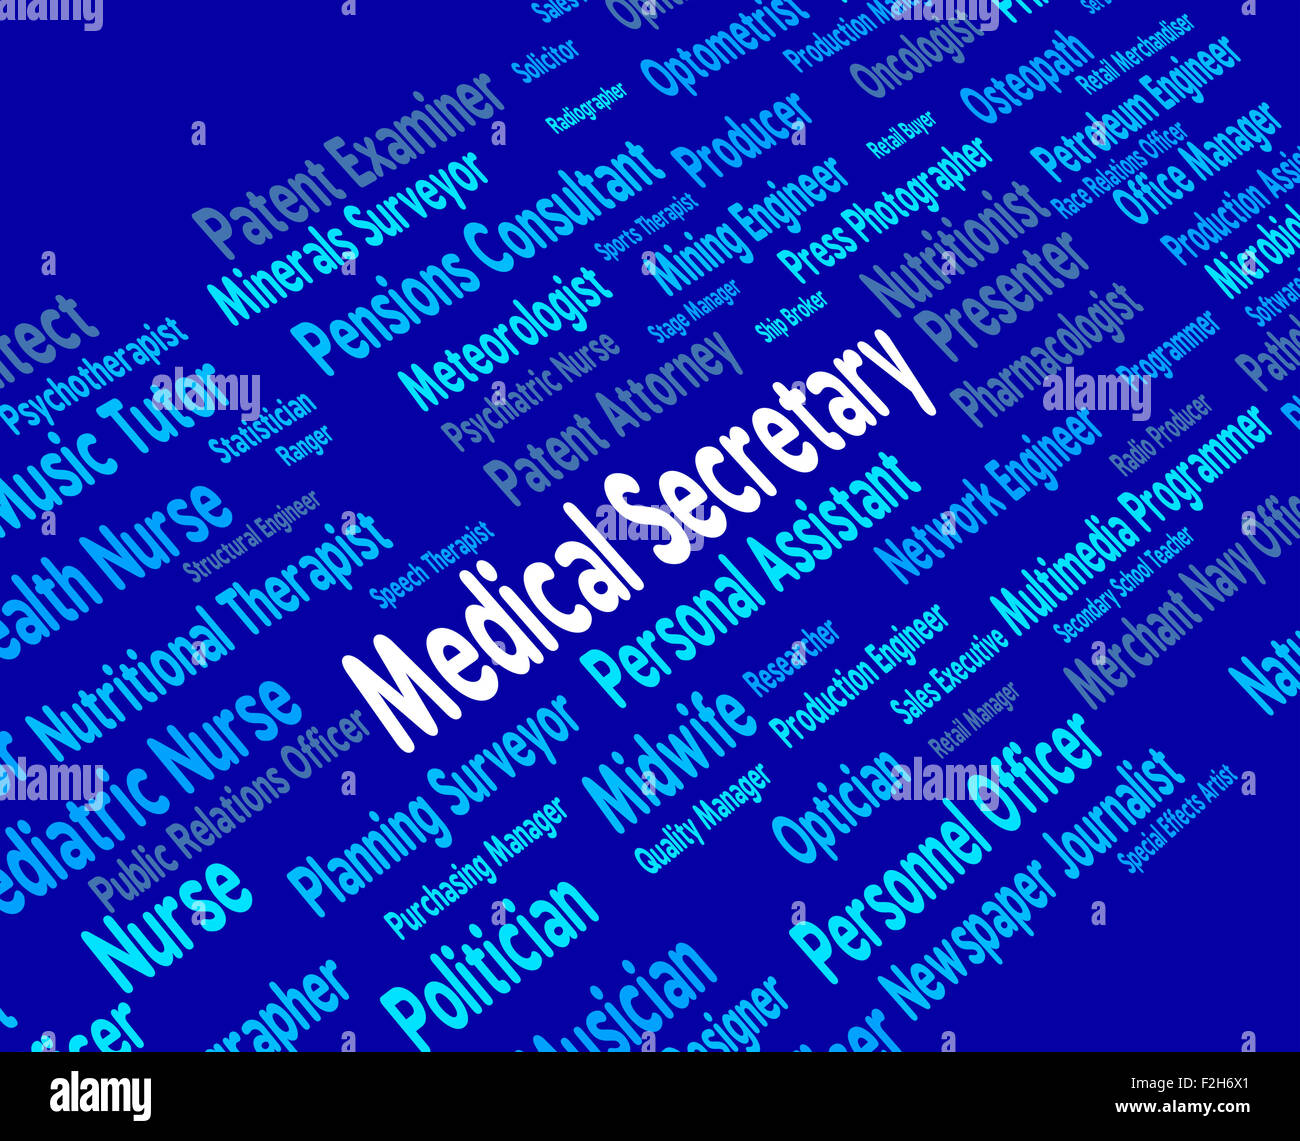 Medical Secretary Meaning Clerical Assistant And Medicine Stock Photo